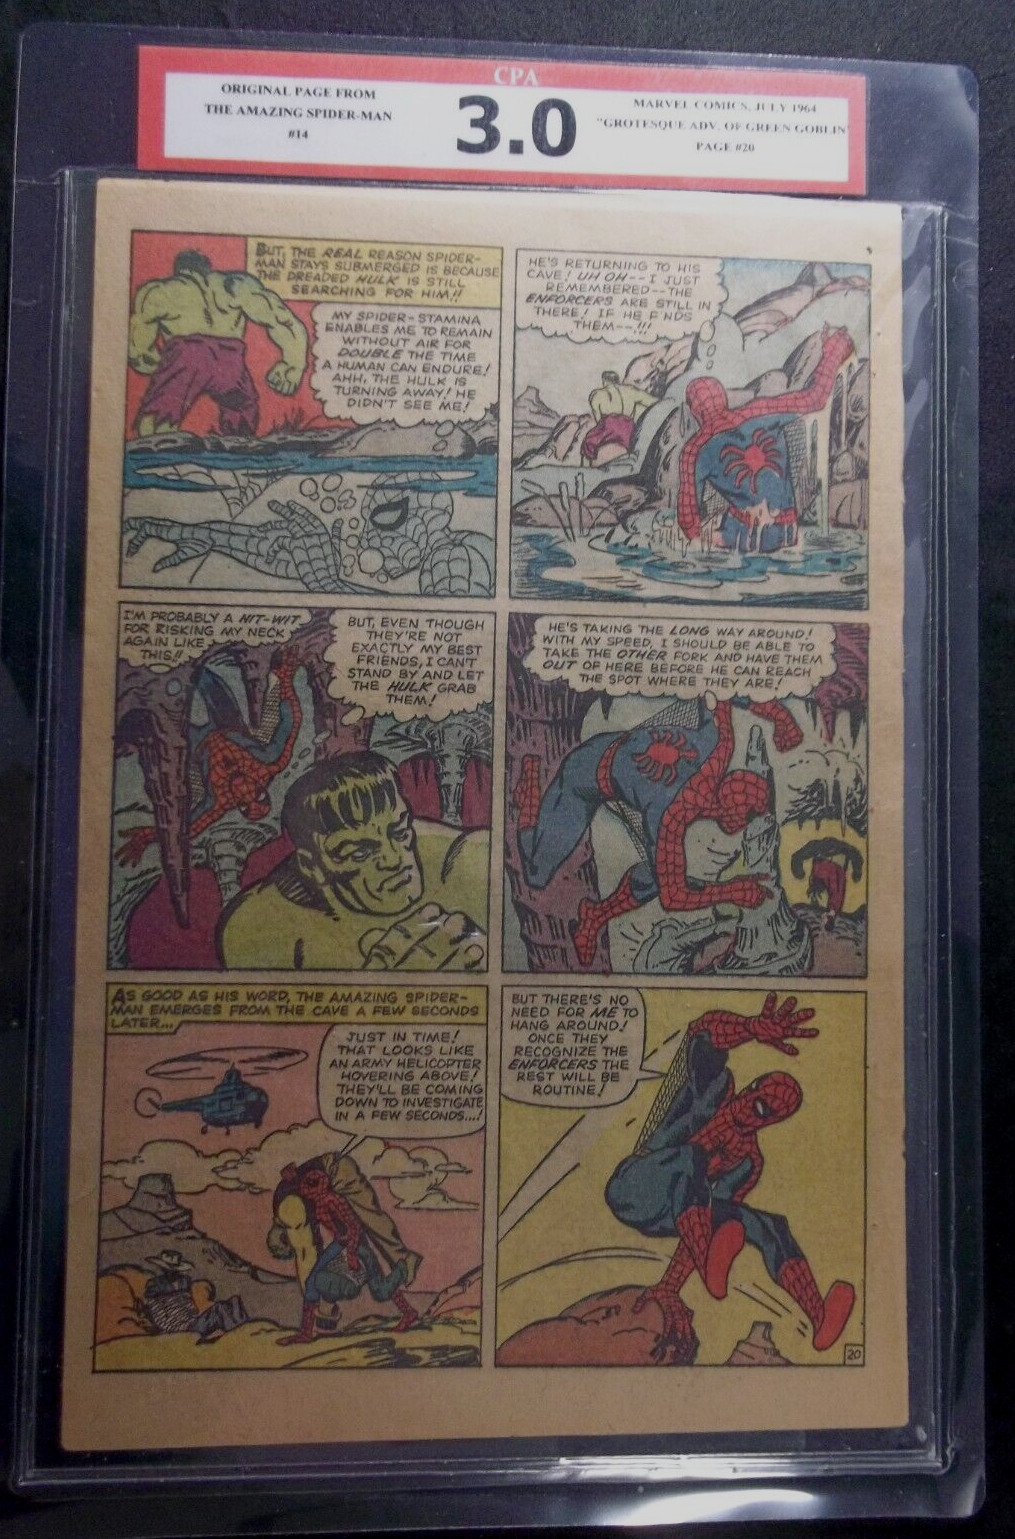 Amazing Spider-man #14 CPA 3.0 SINGLE PAGE #20 1st app. The Green Goblin